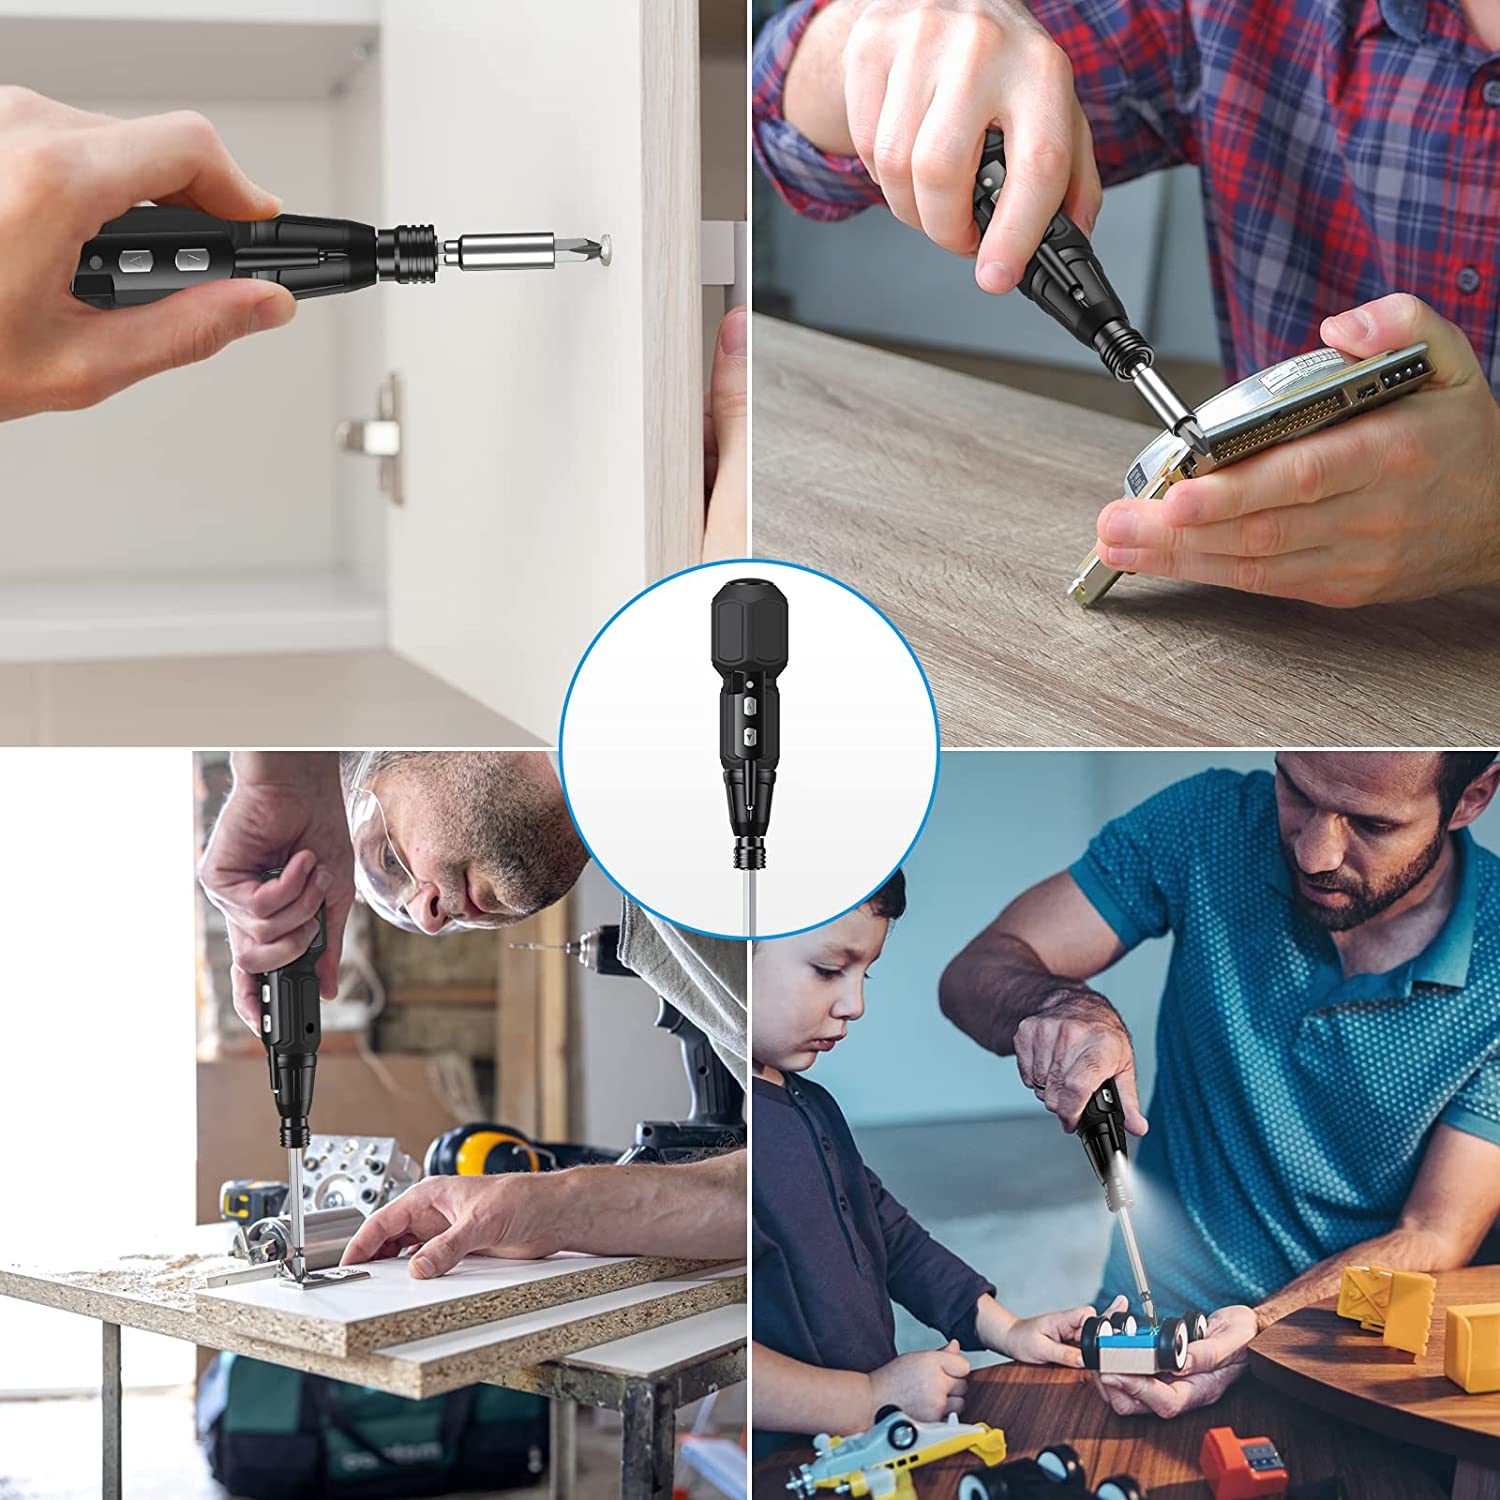 (HOT SALE NOW 49% OFF) - Electric Screwdriver Cordless